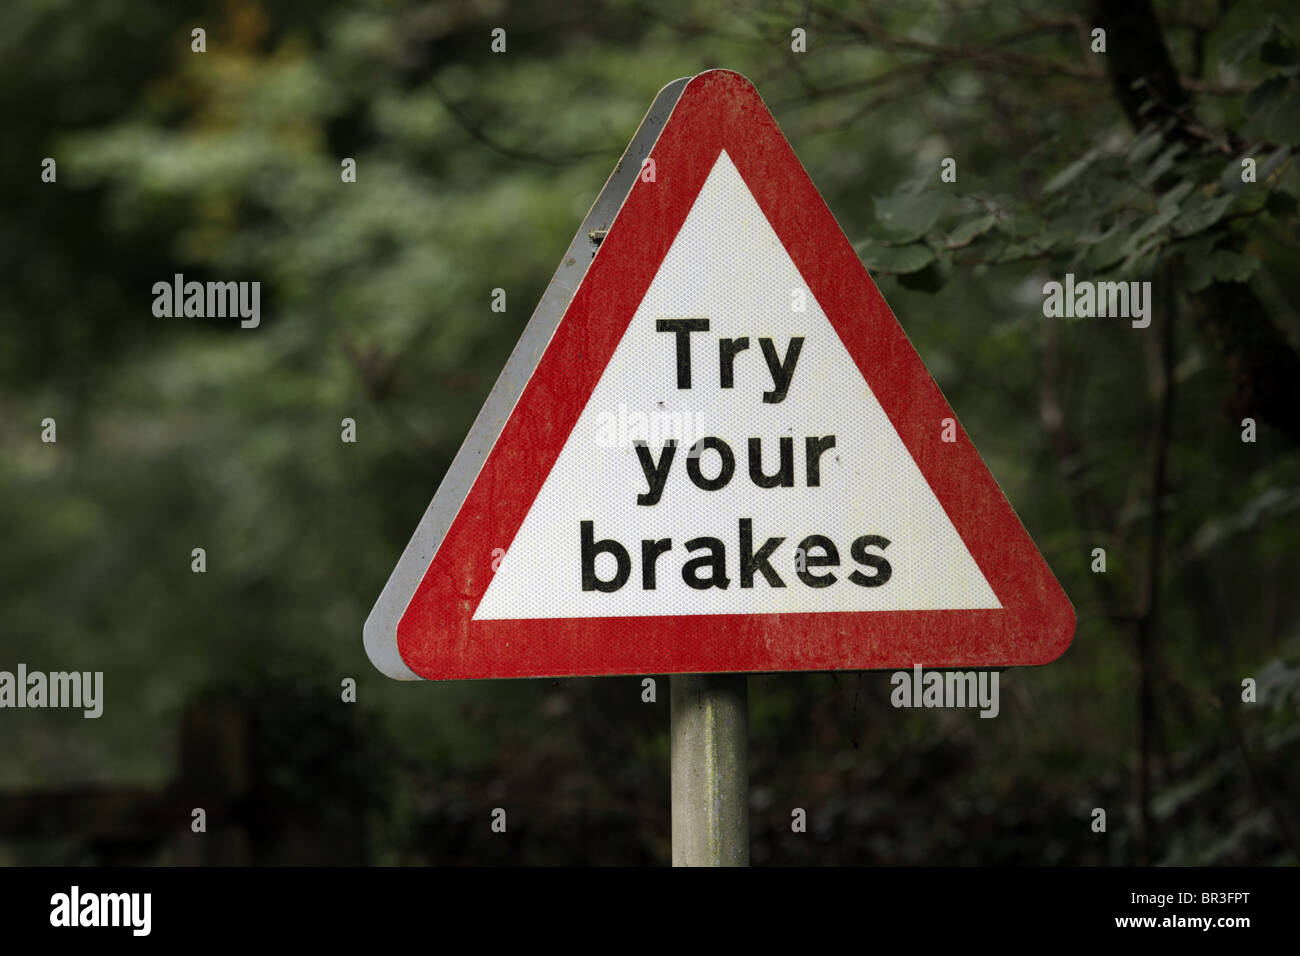 Try your brakes warning sign Stock Photo